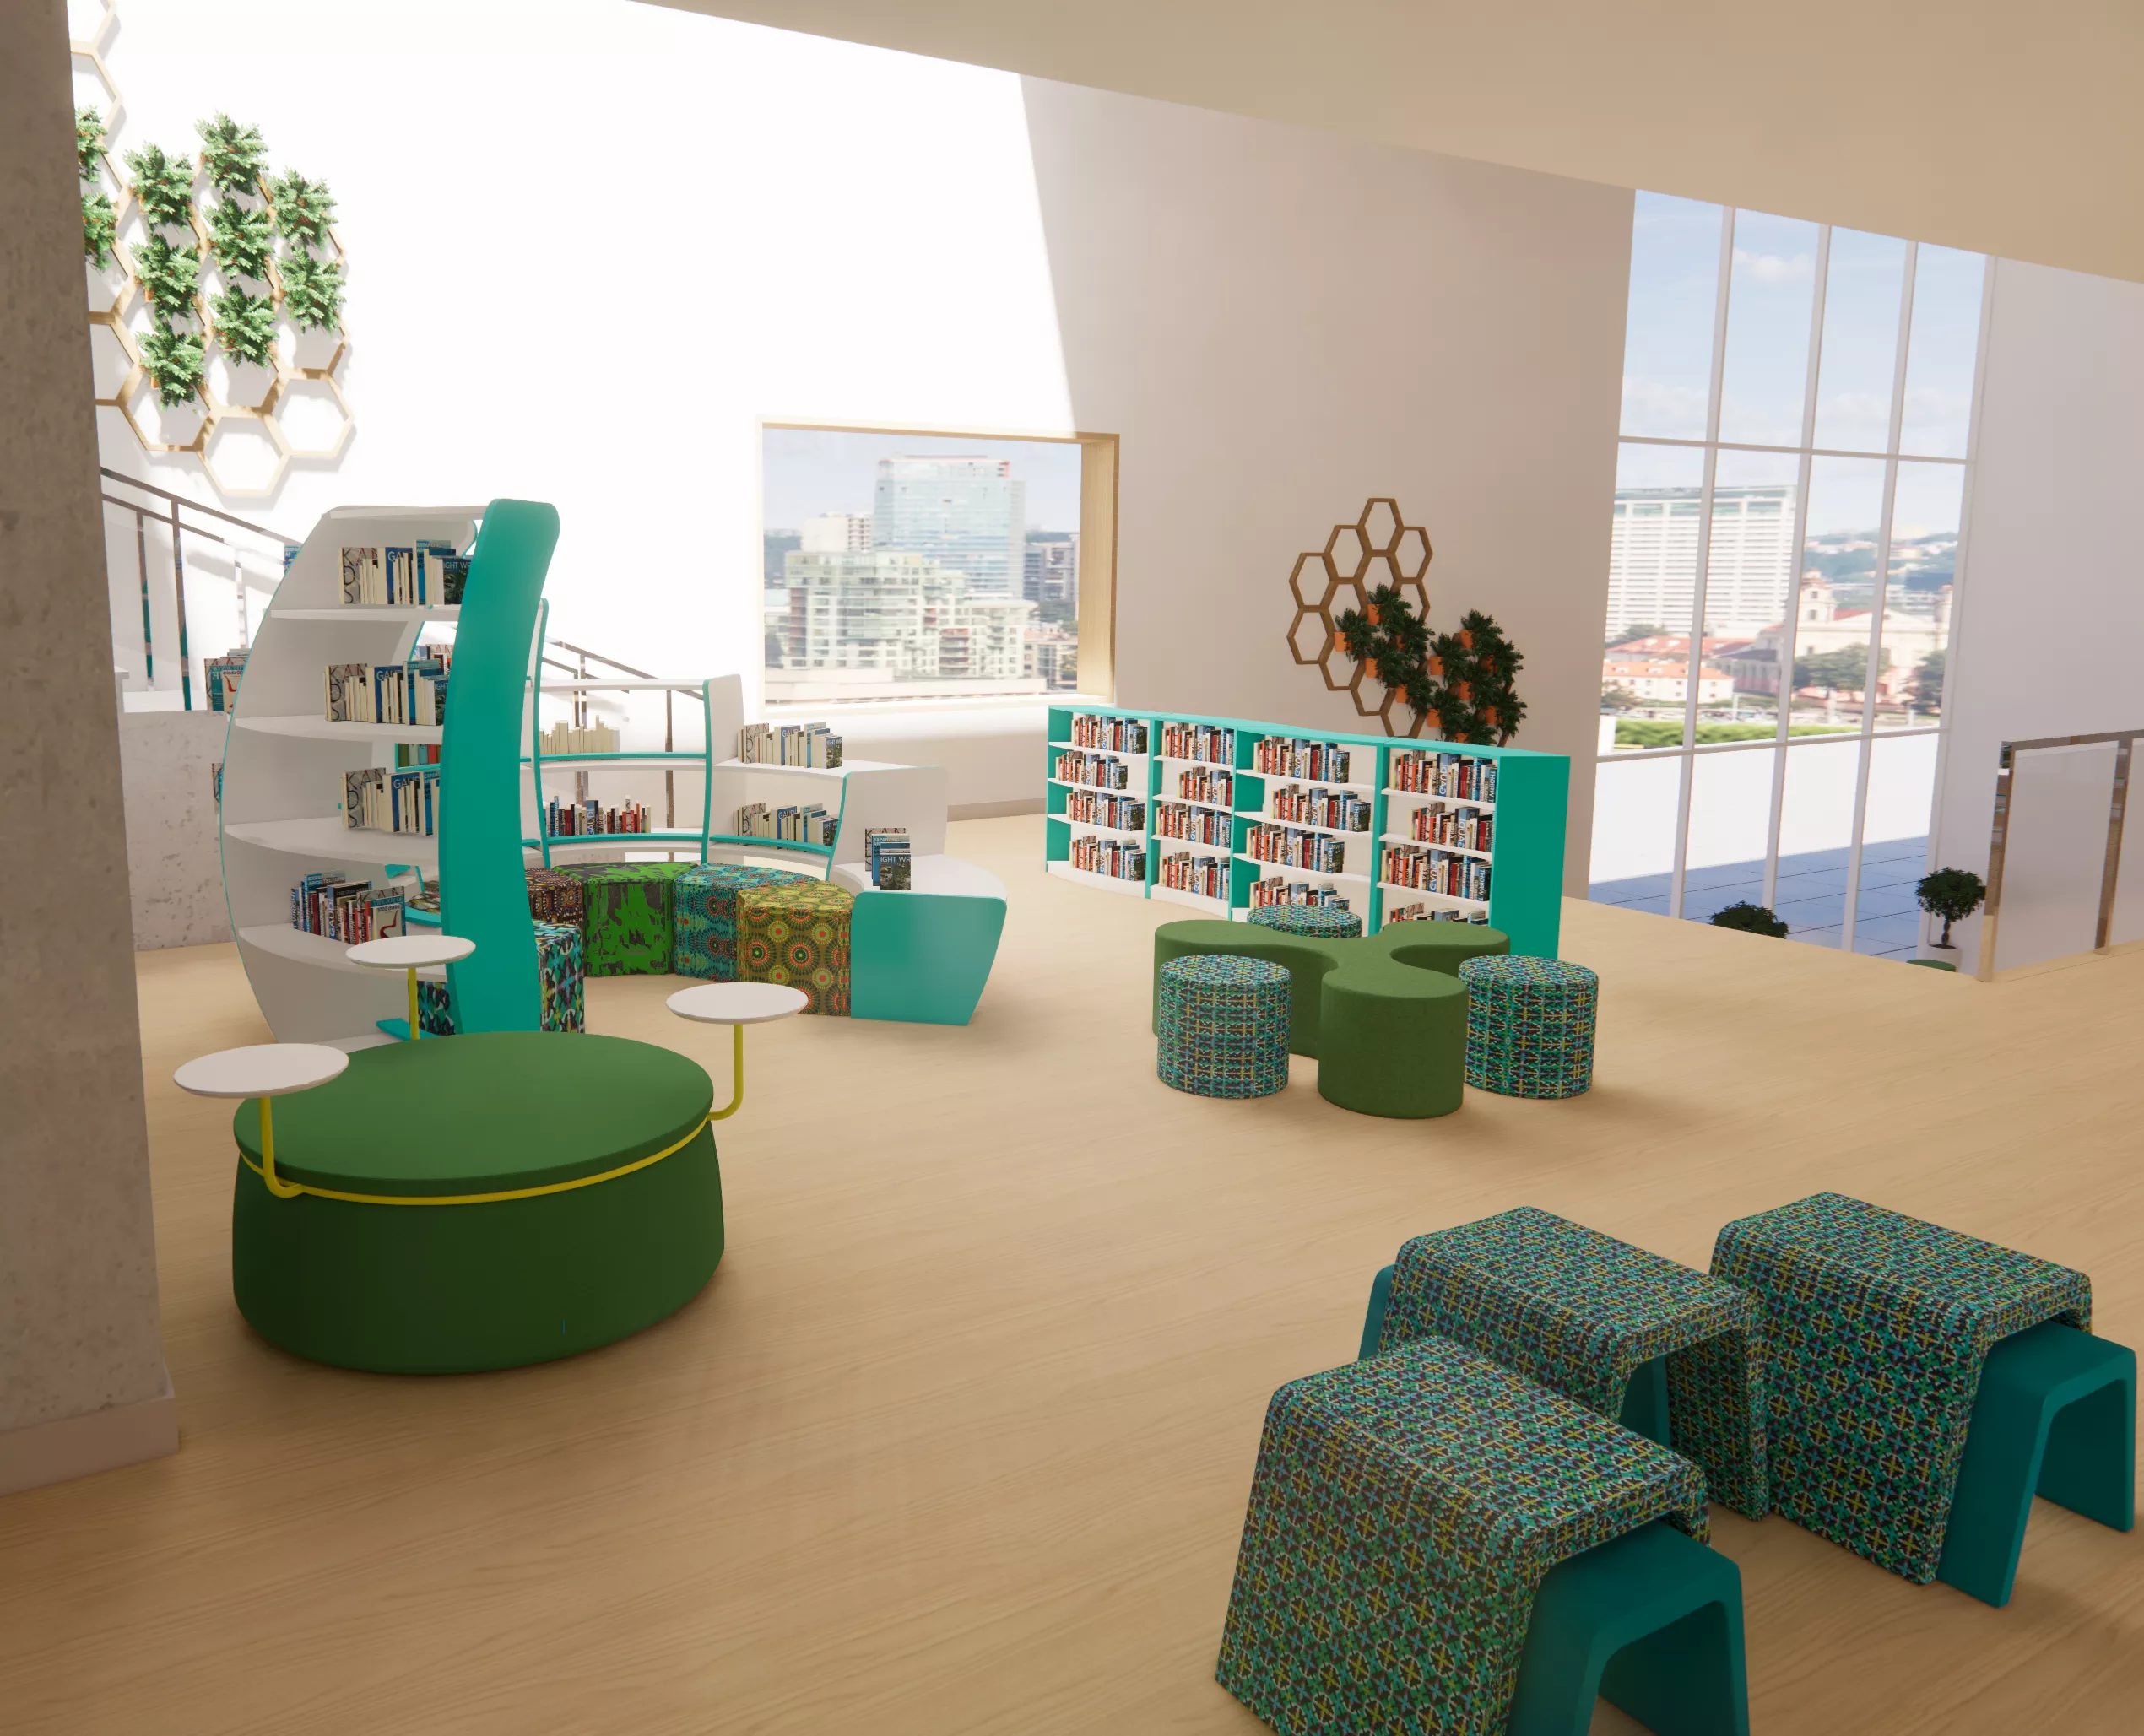 Does Your School Library Need a Redesign?